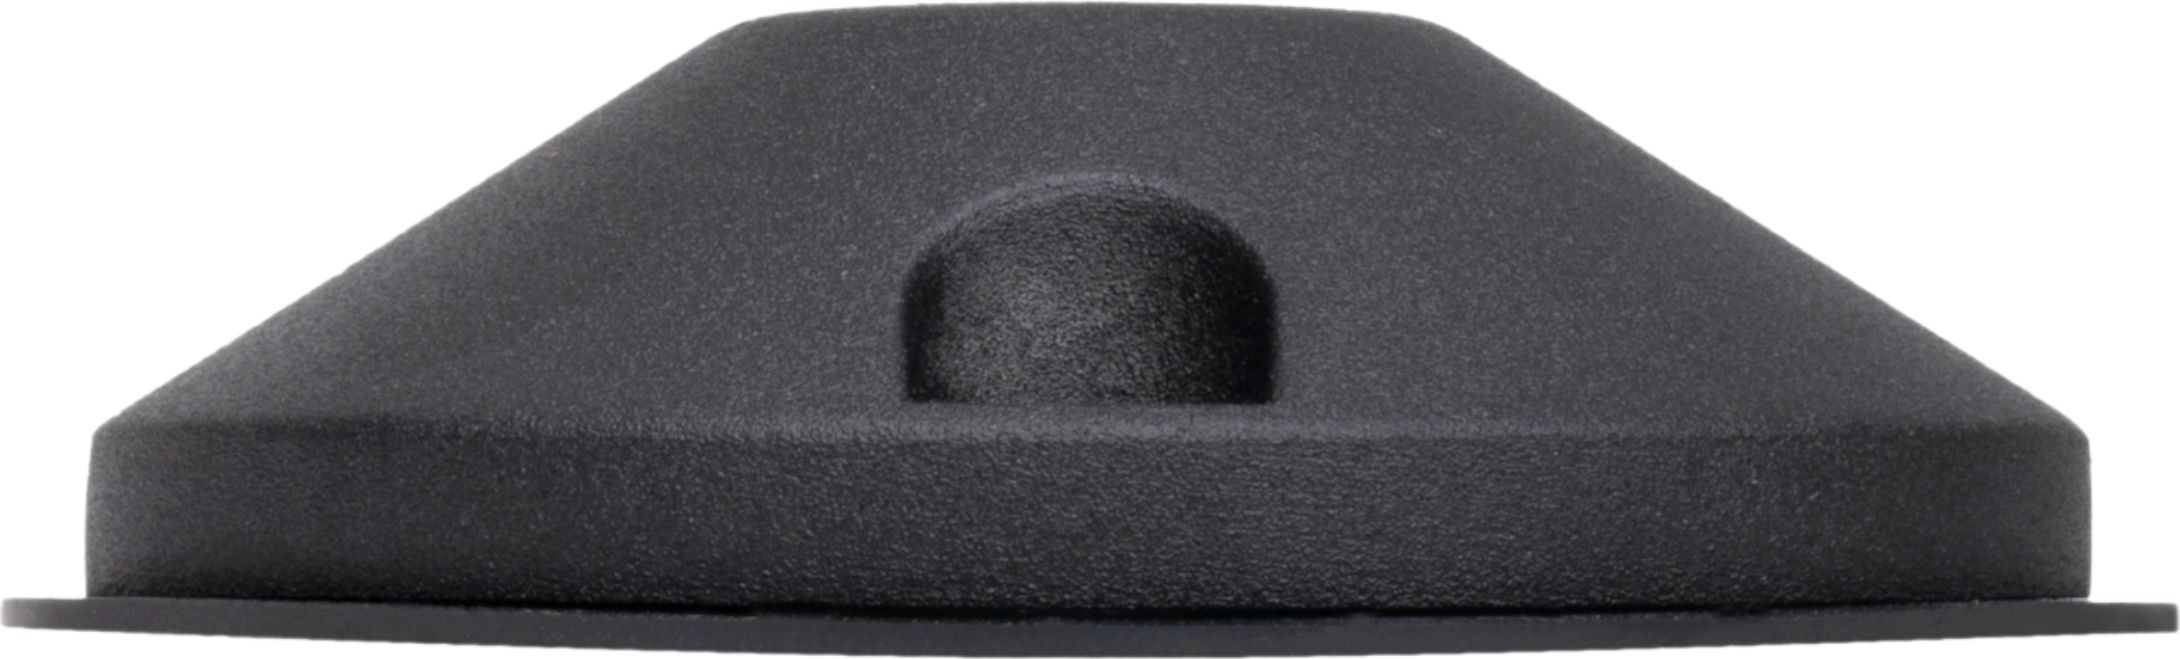 Angle View: Sonance - Outdoor Round Surface Mount (Each) - Black